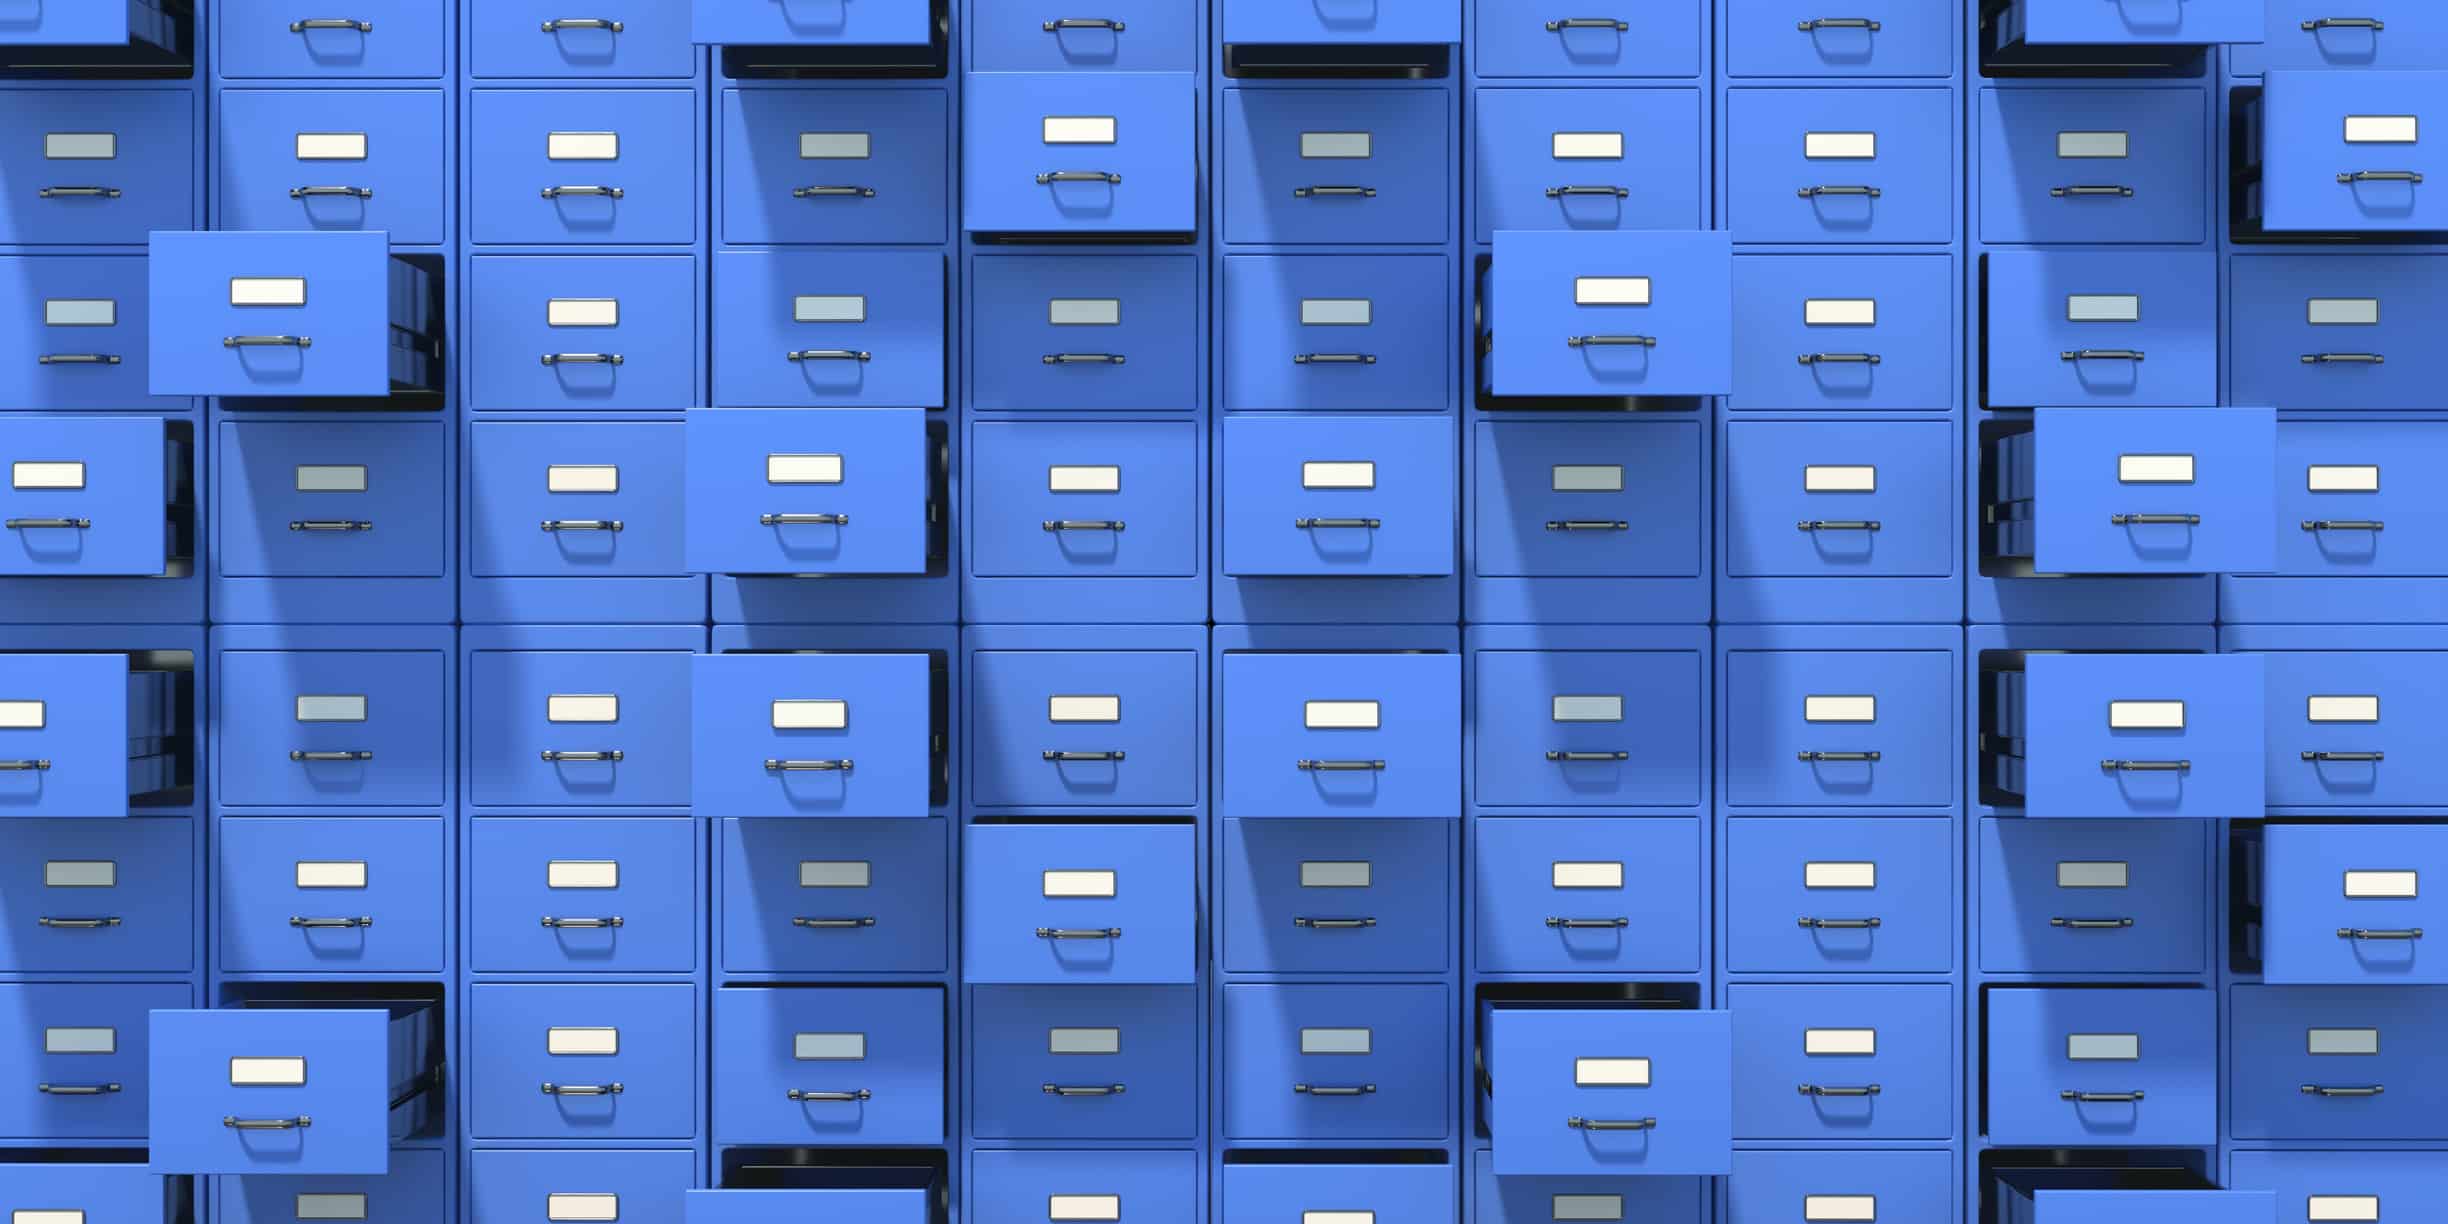 records management filing cabinet